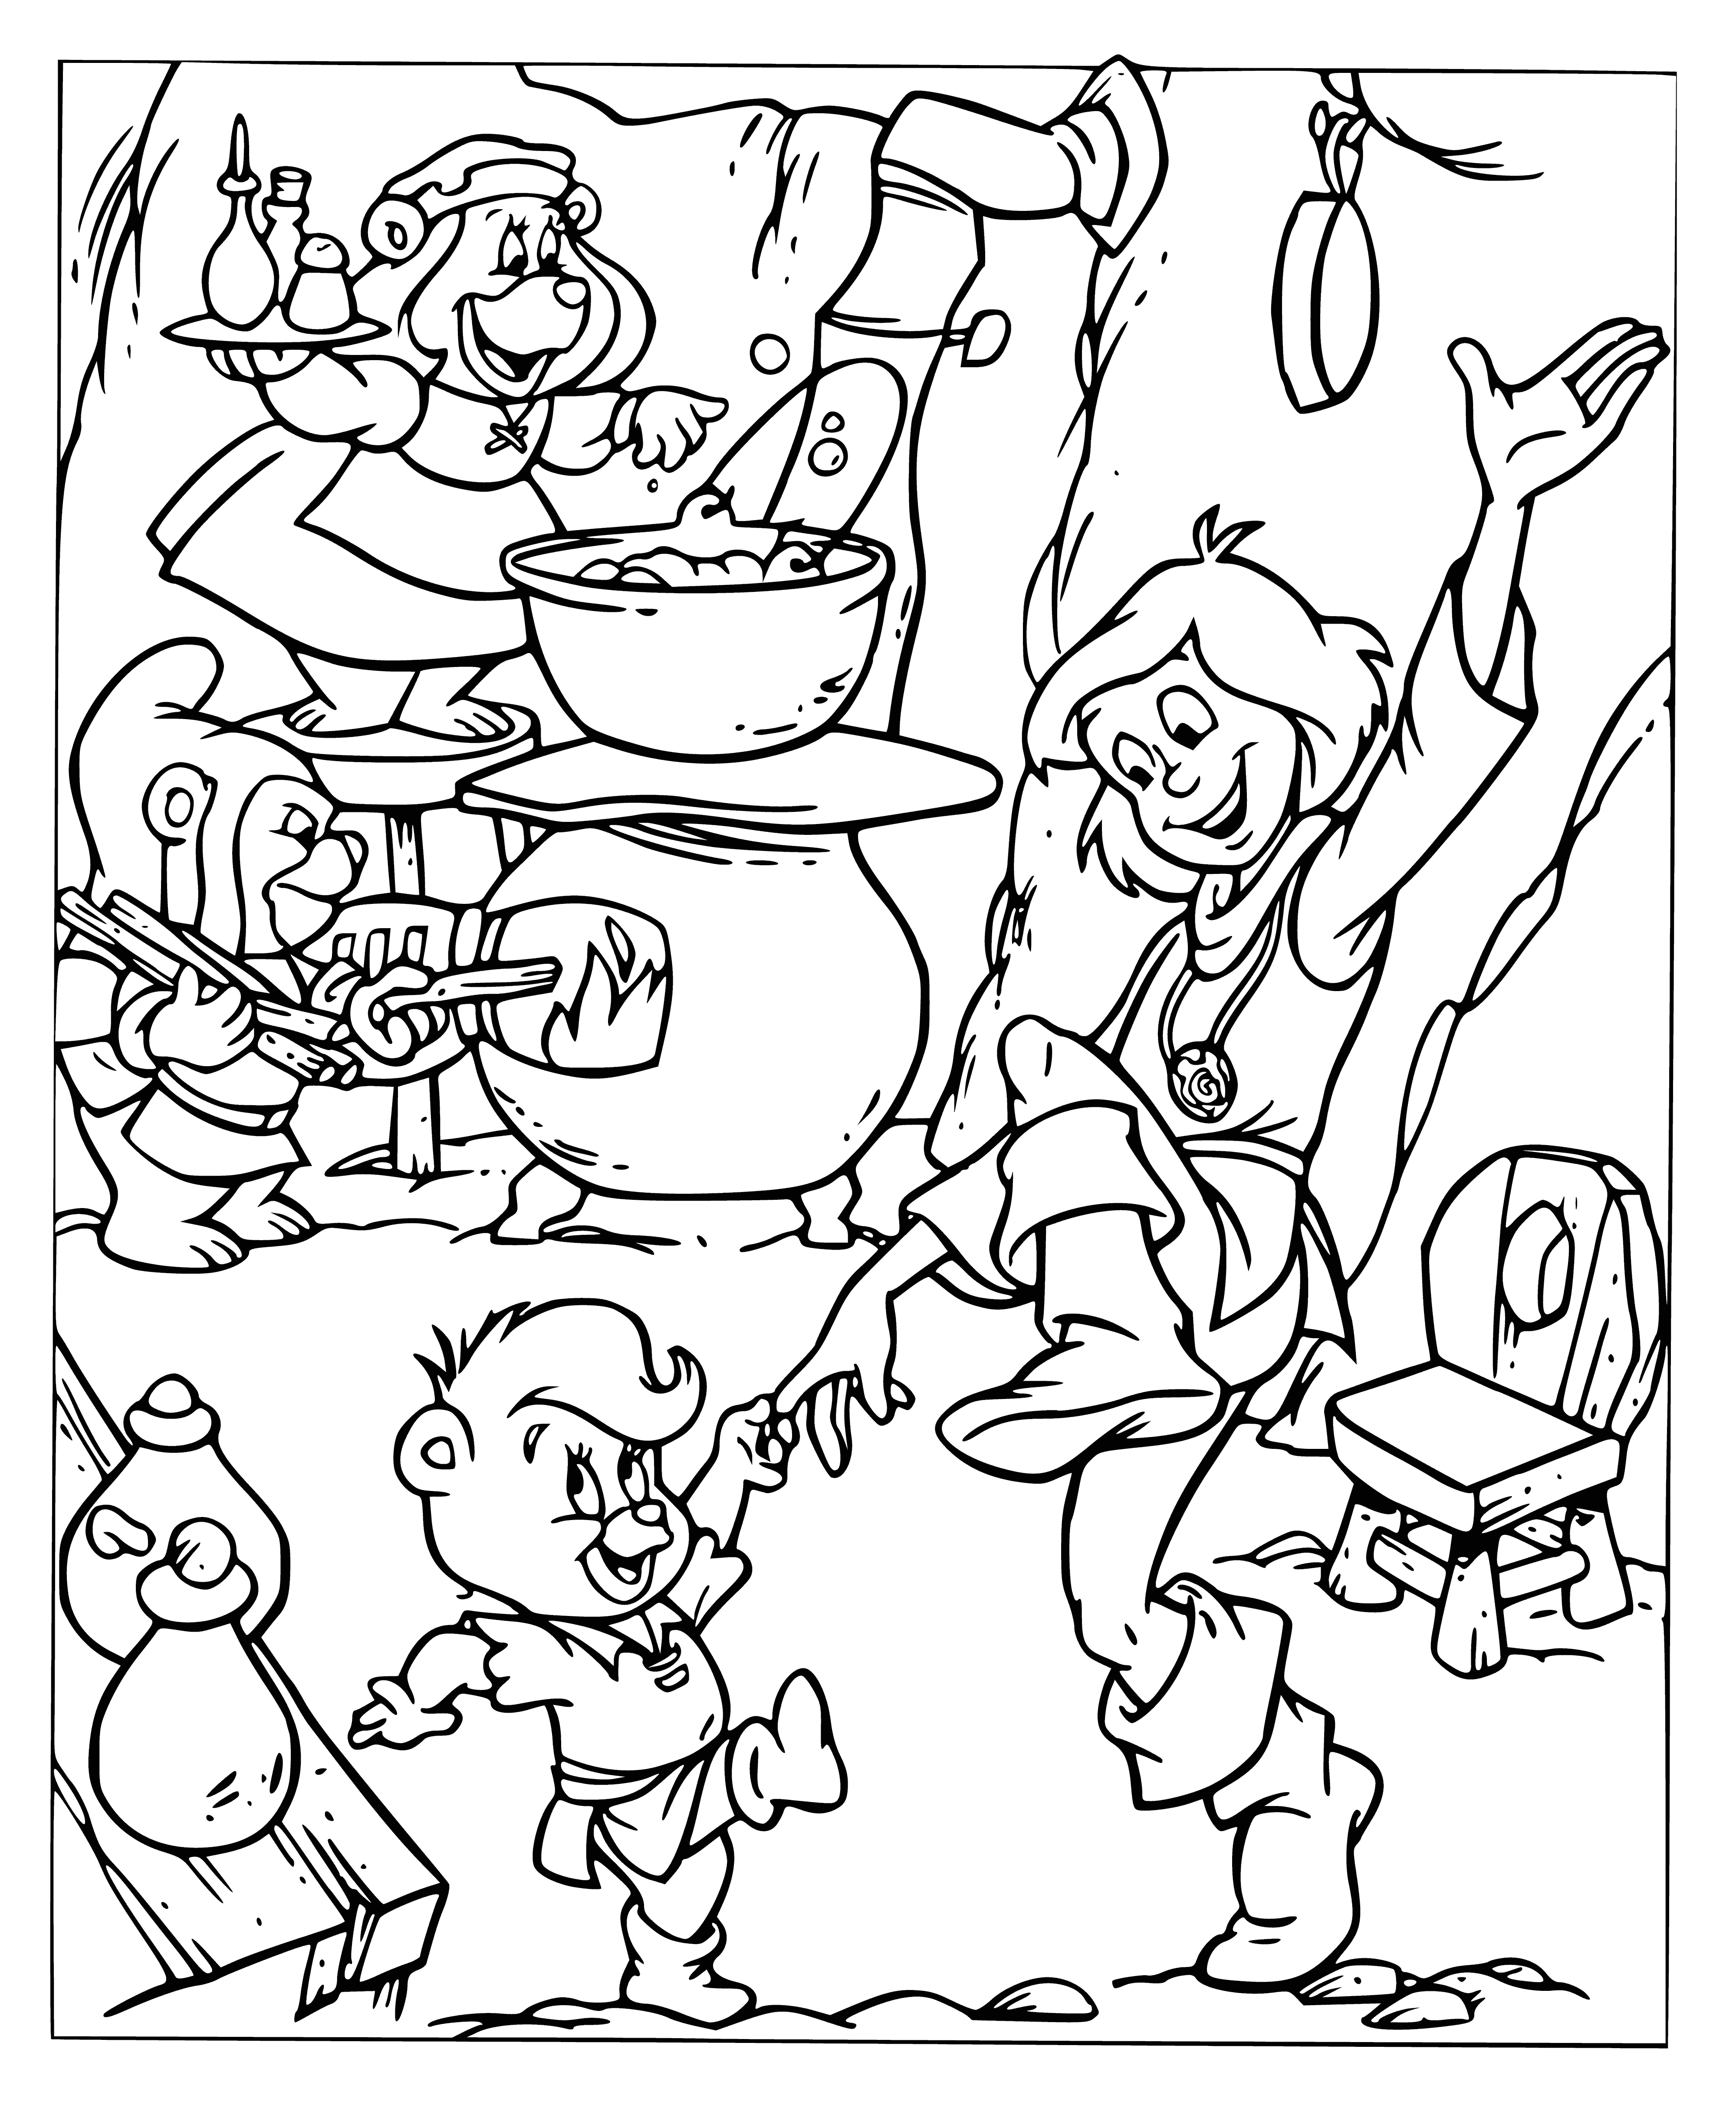 coloring page: There are five gummy bears of different colors (red, green, yellow, blue, and orange) on a coloring page, all facing each other and smiling.